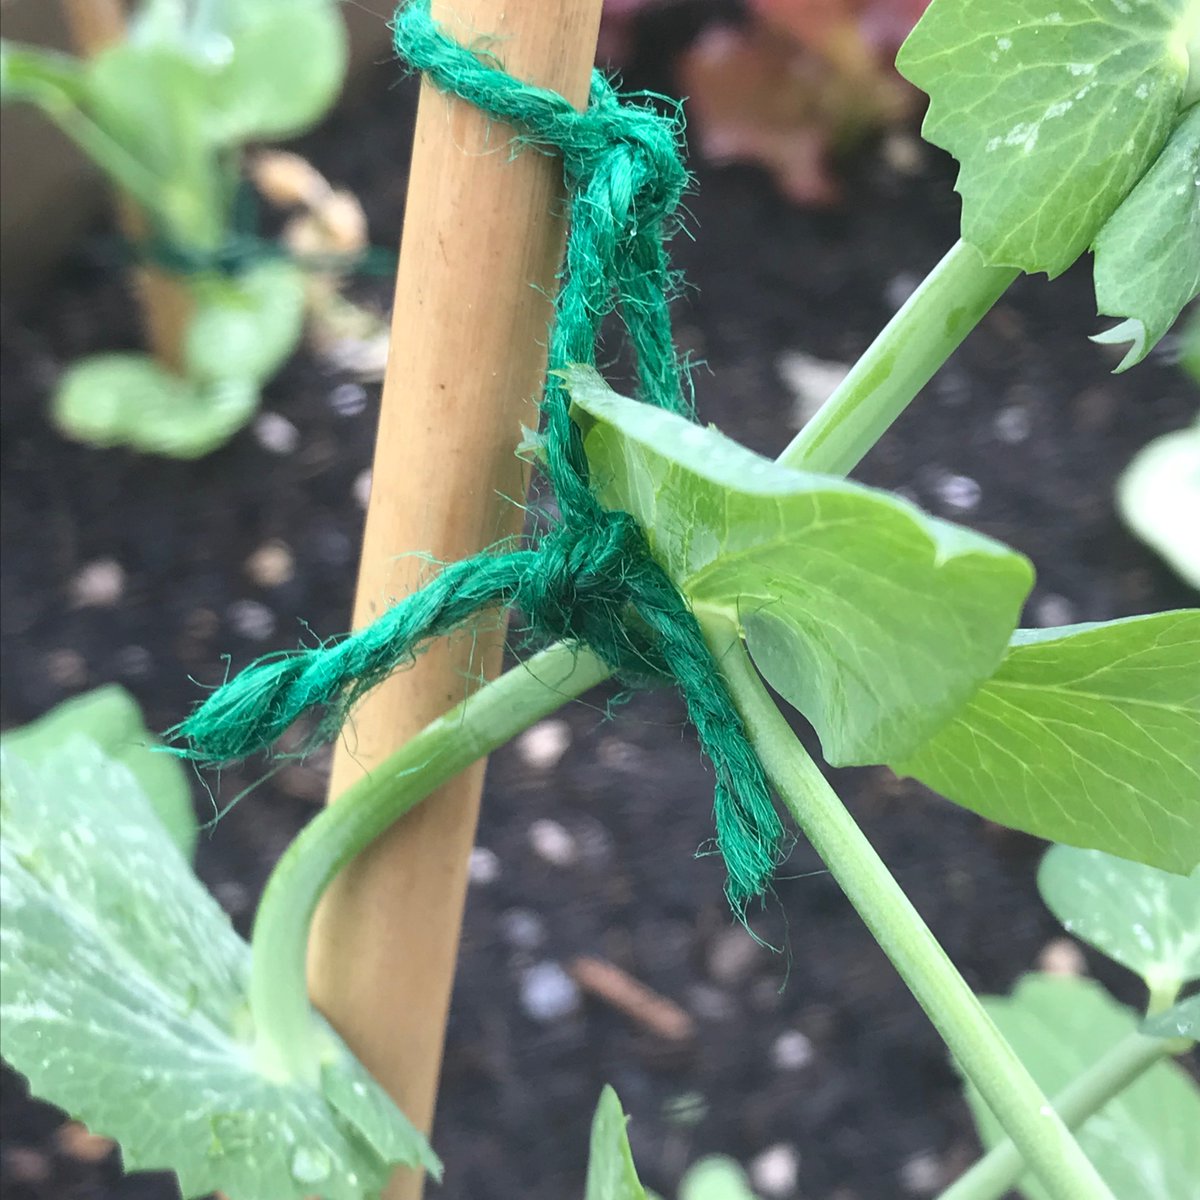 especially when they’re first getting established in the ground, tie-in pea plants for support, and remove the natural tendrils so plant energy goes into producing healthy growth
#GrowYourOwn #Kilmacolm #communitygrowing